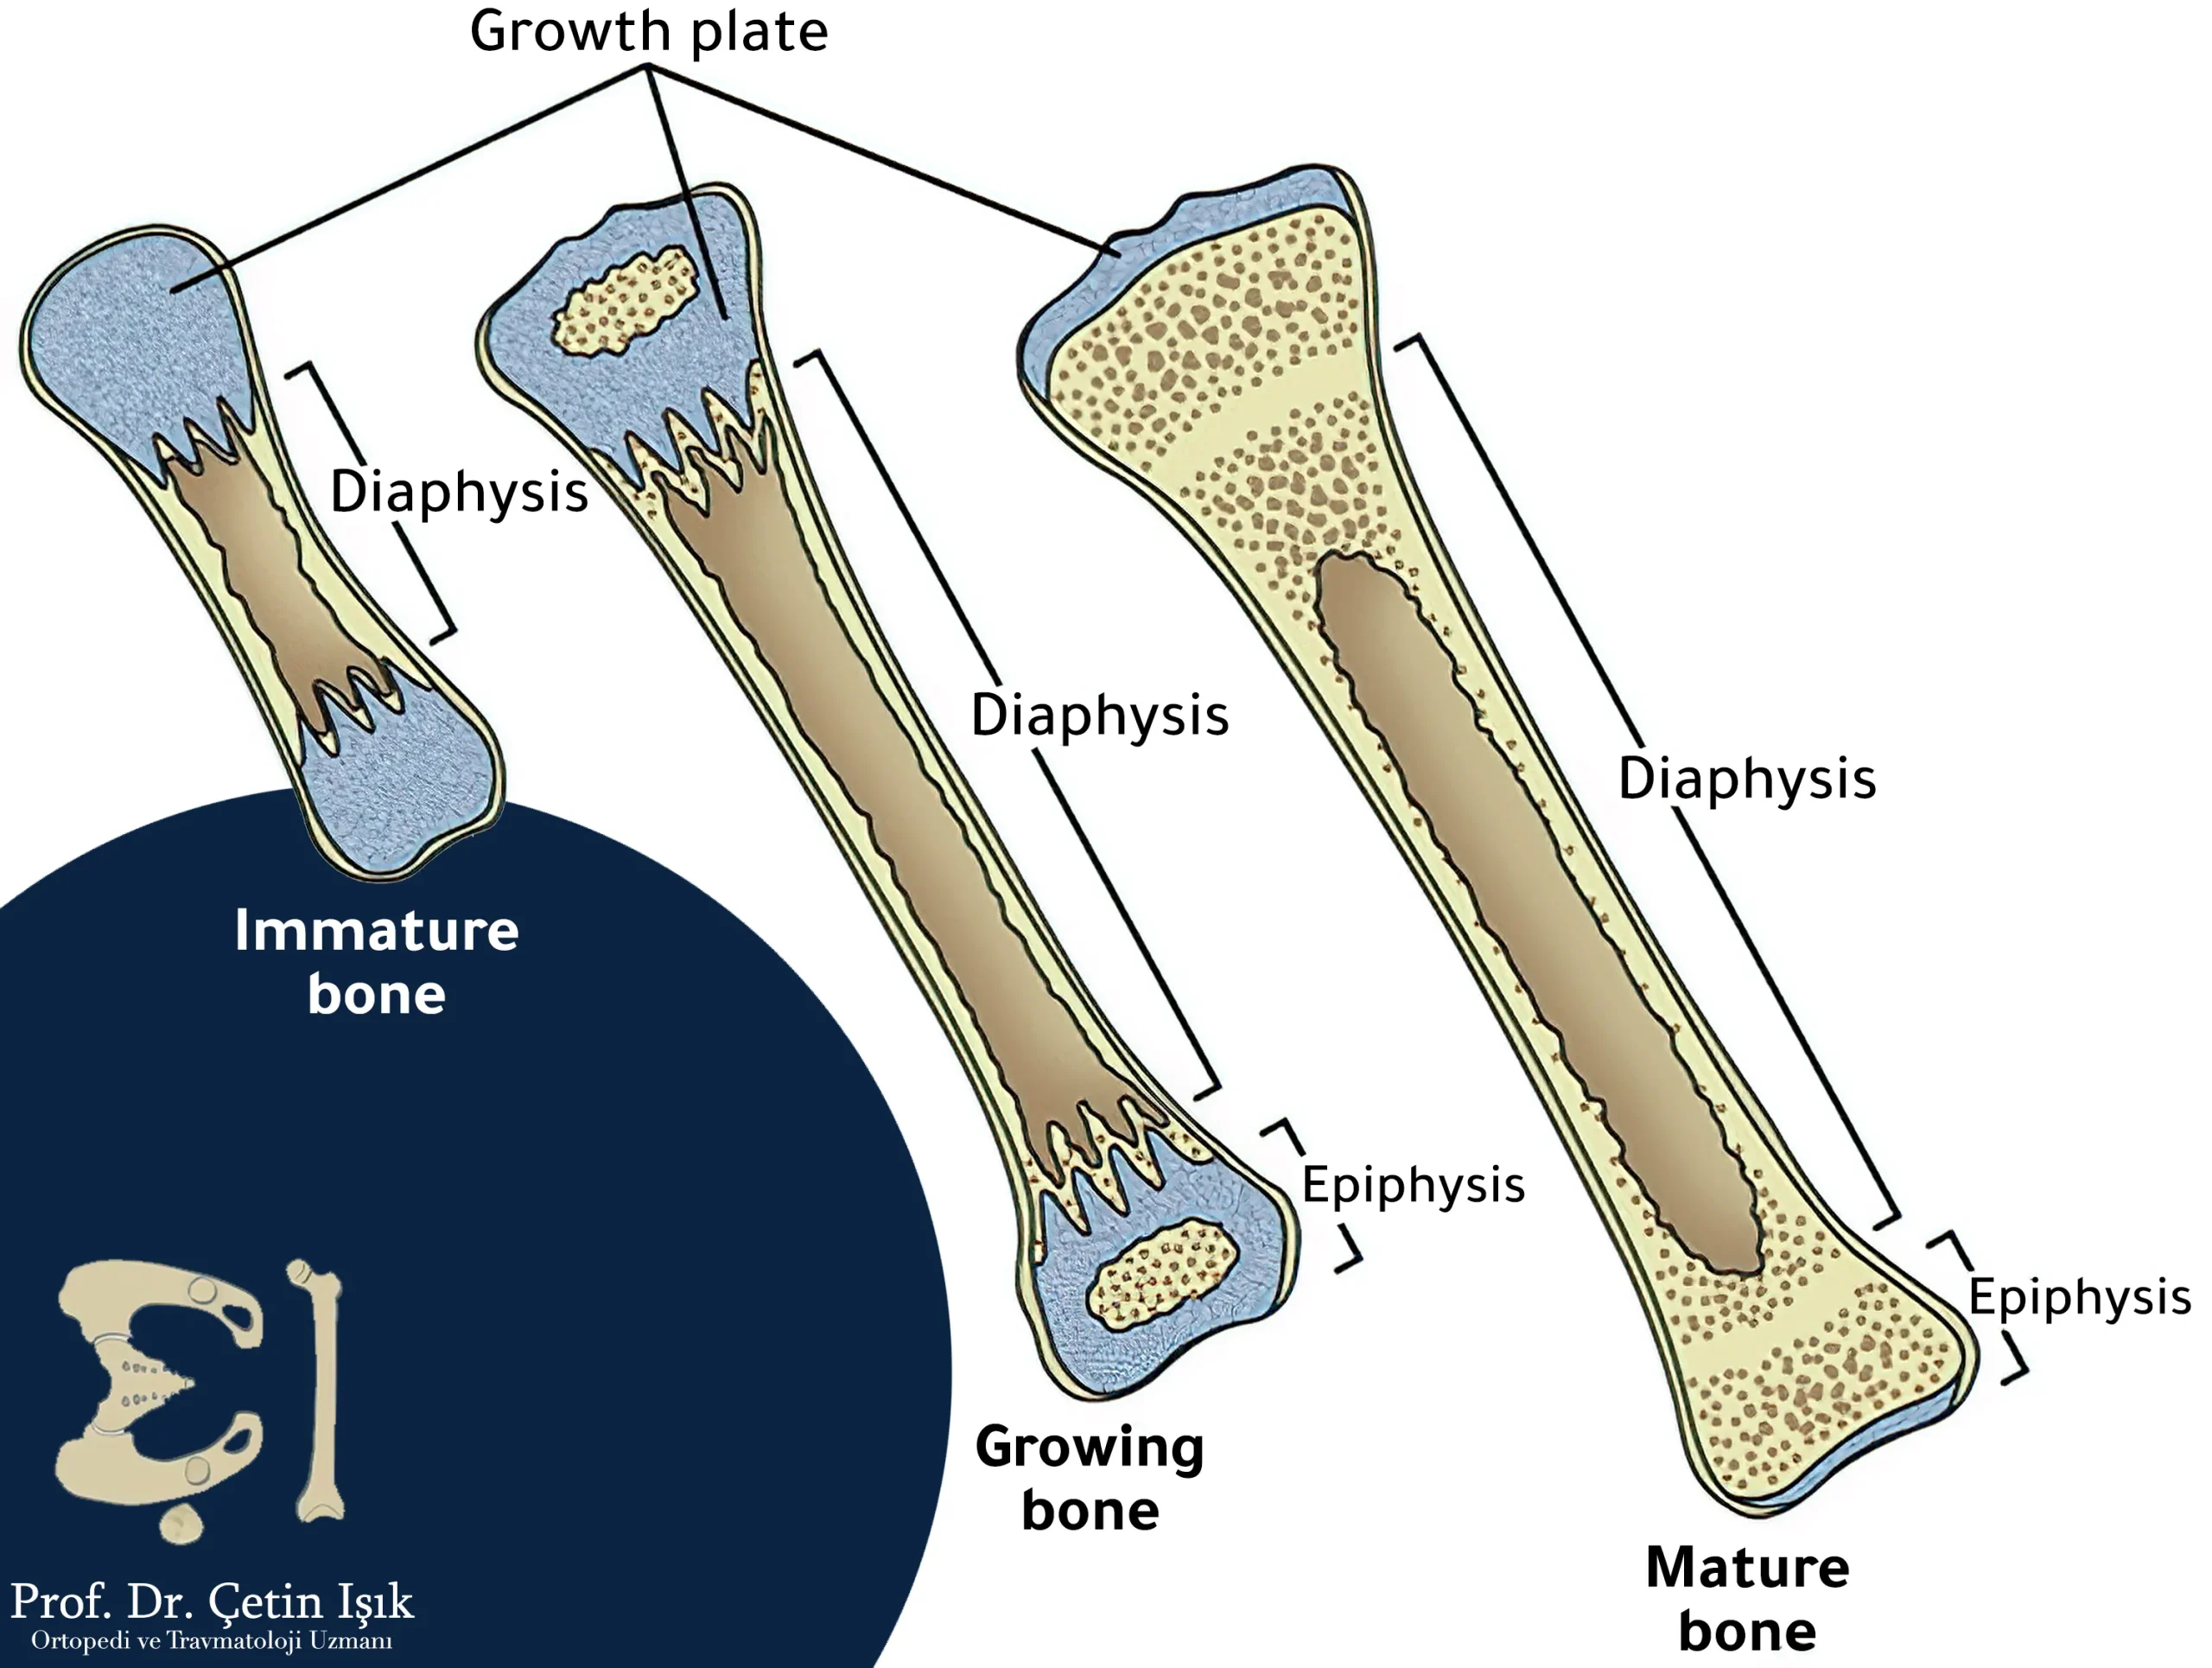 Bone types can be classified in terms of Microscopic examination into an immature primary bone in the embryonic stage that is replaced by a mature secondary bone at puberty.